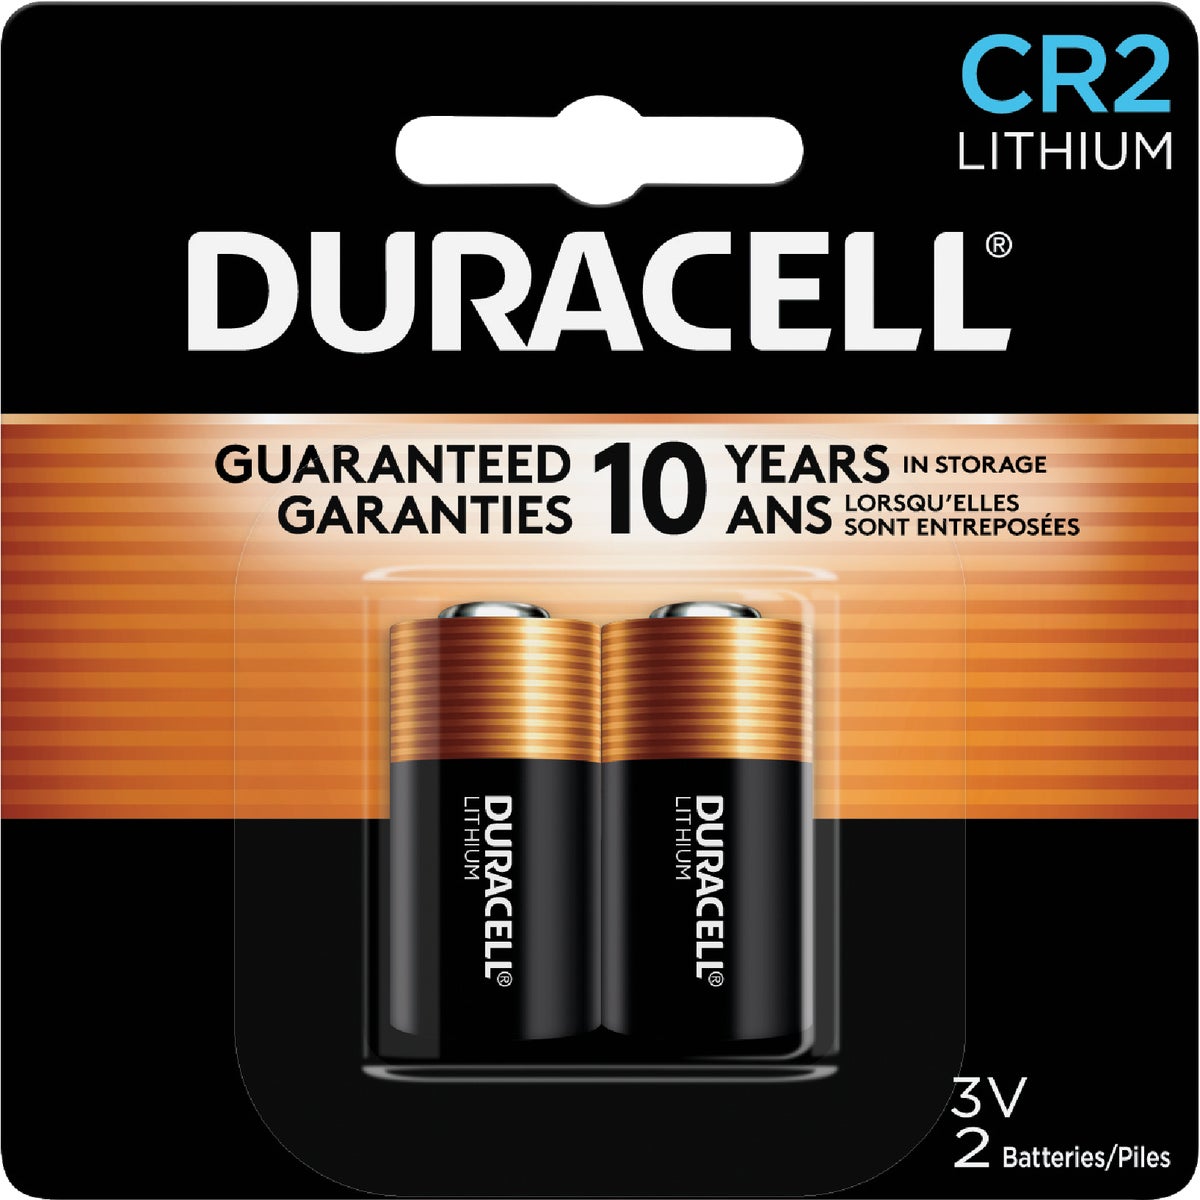 Item 845884, Ultra lithium CR2 battery has Duralock Power Preserve Technology to 